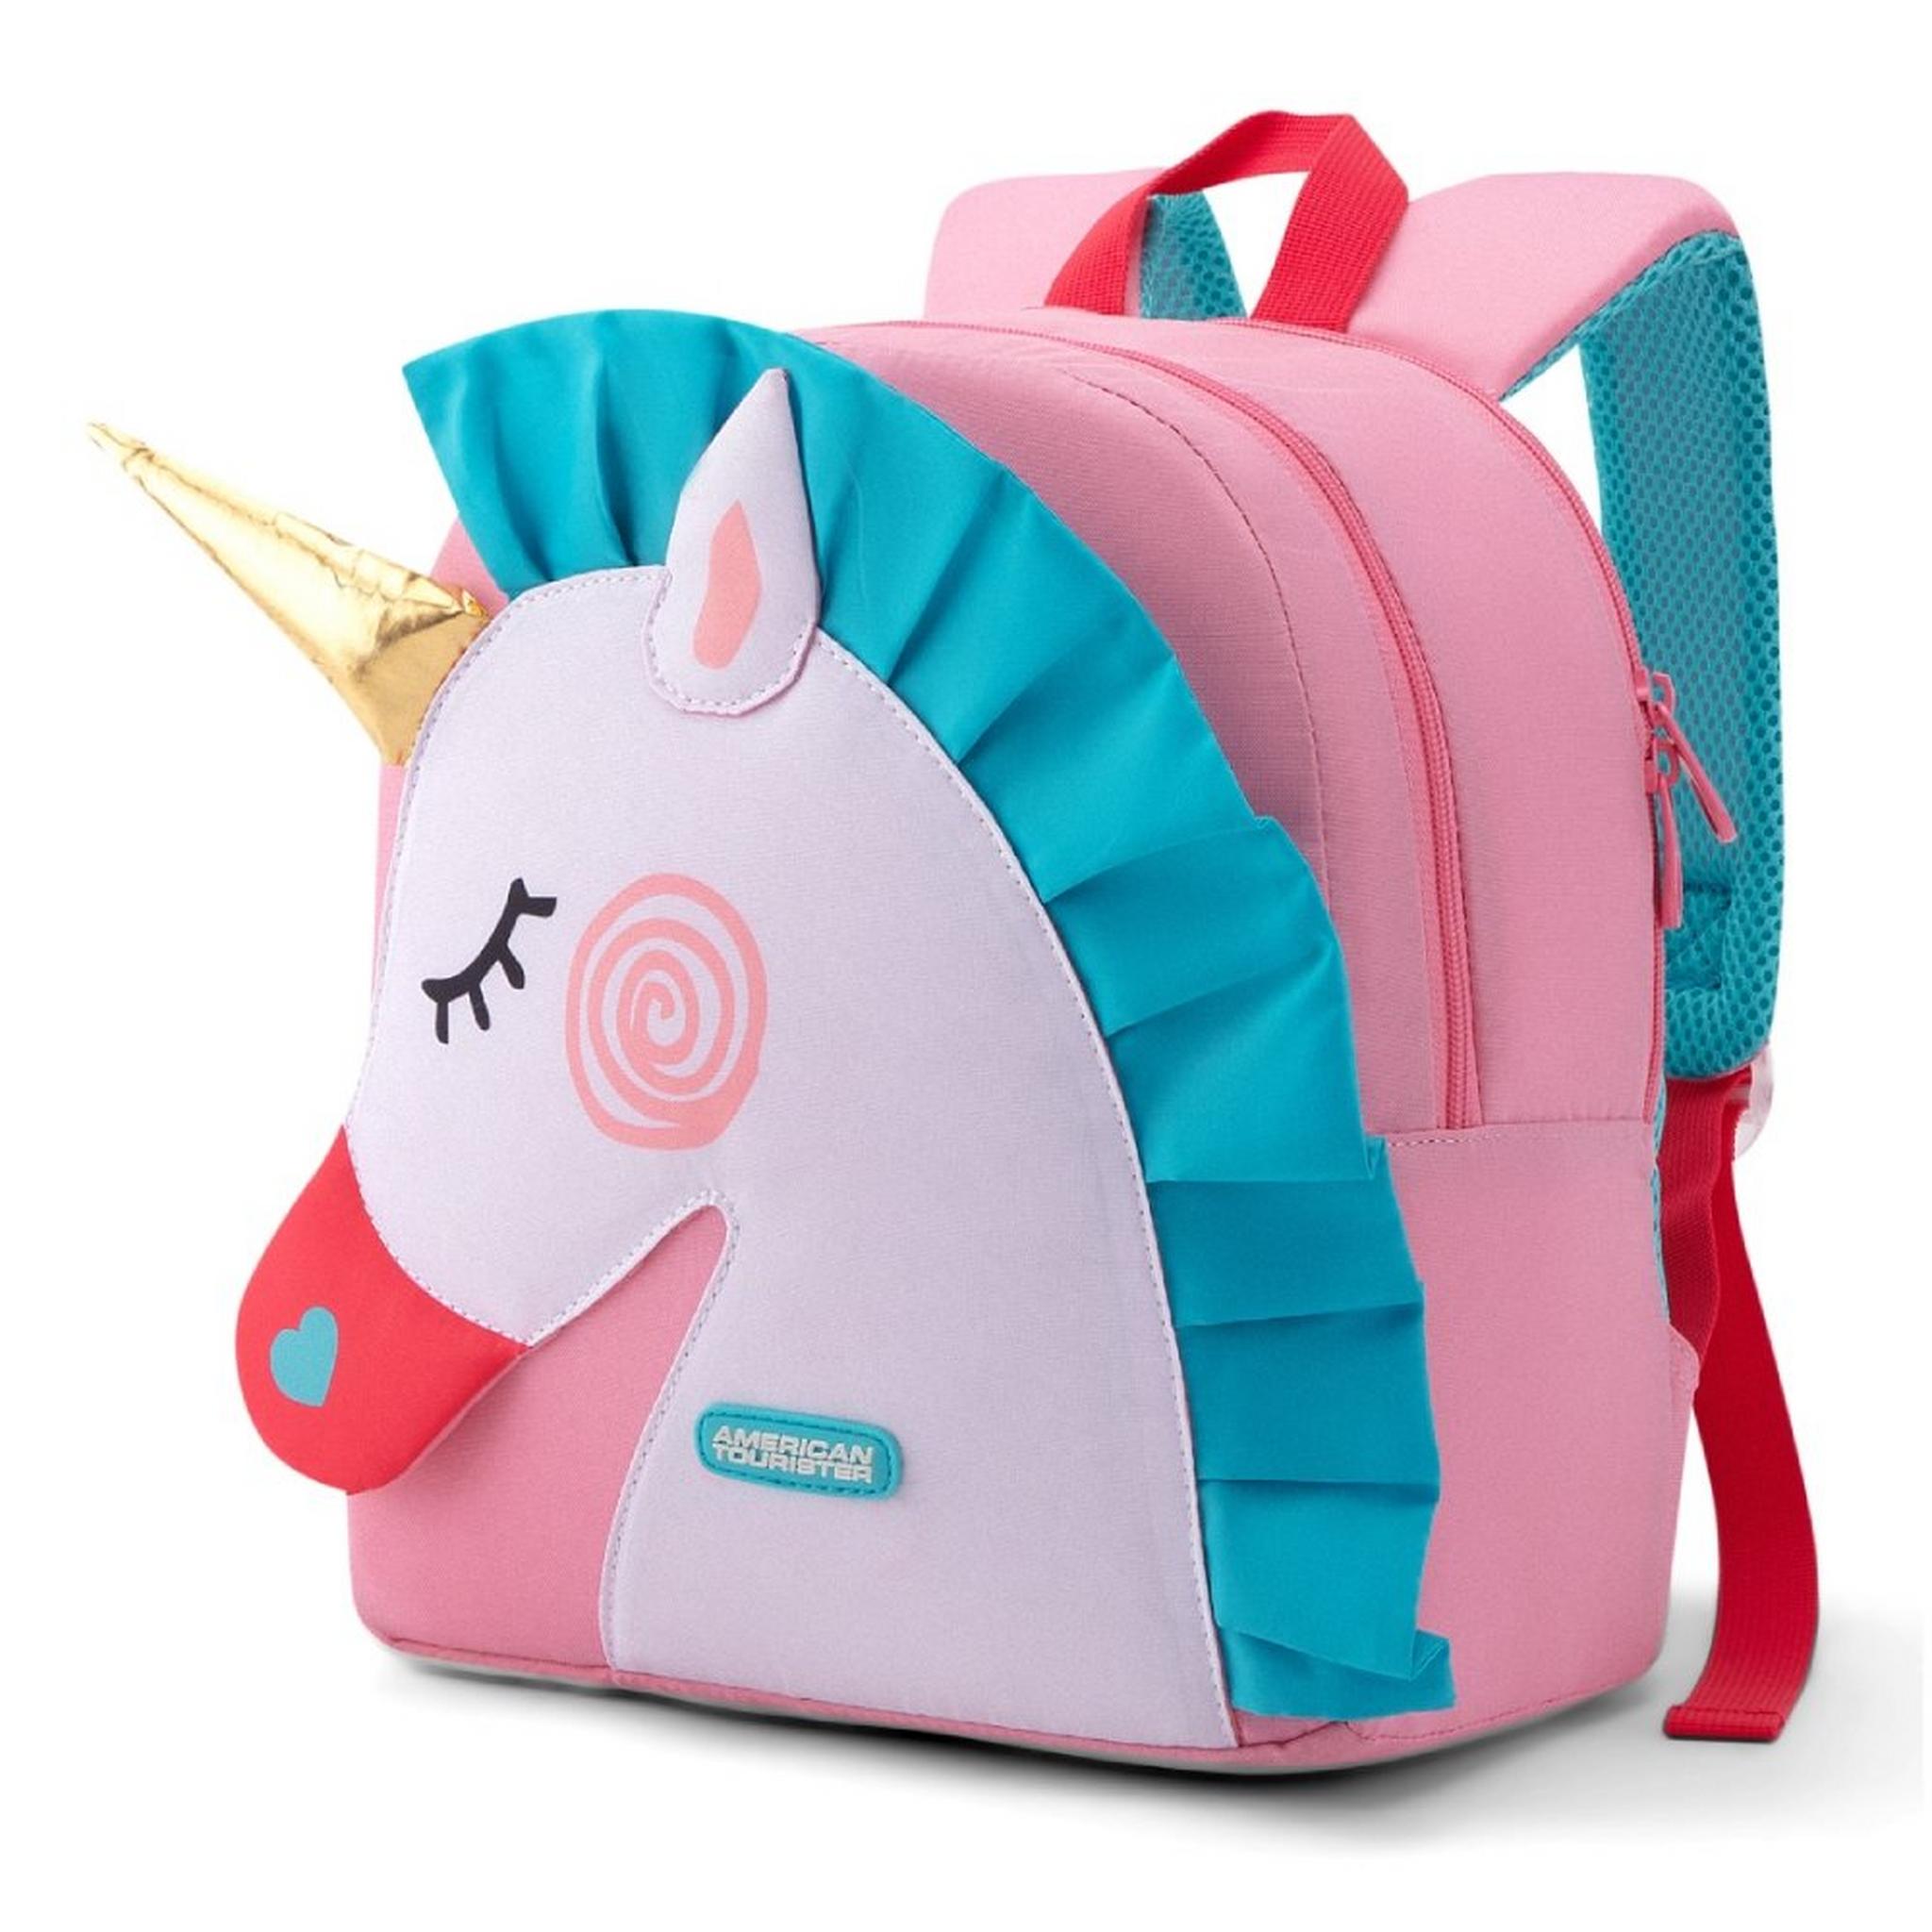 American Tourister Coodle Plus Backpack - Unicorn Pink